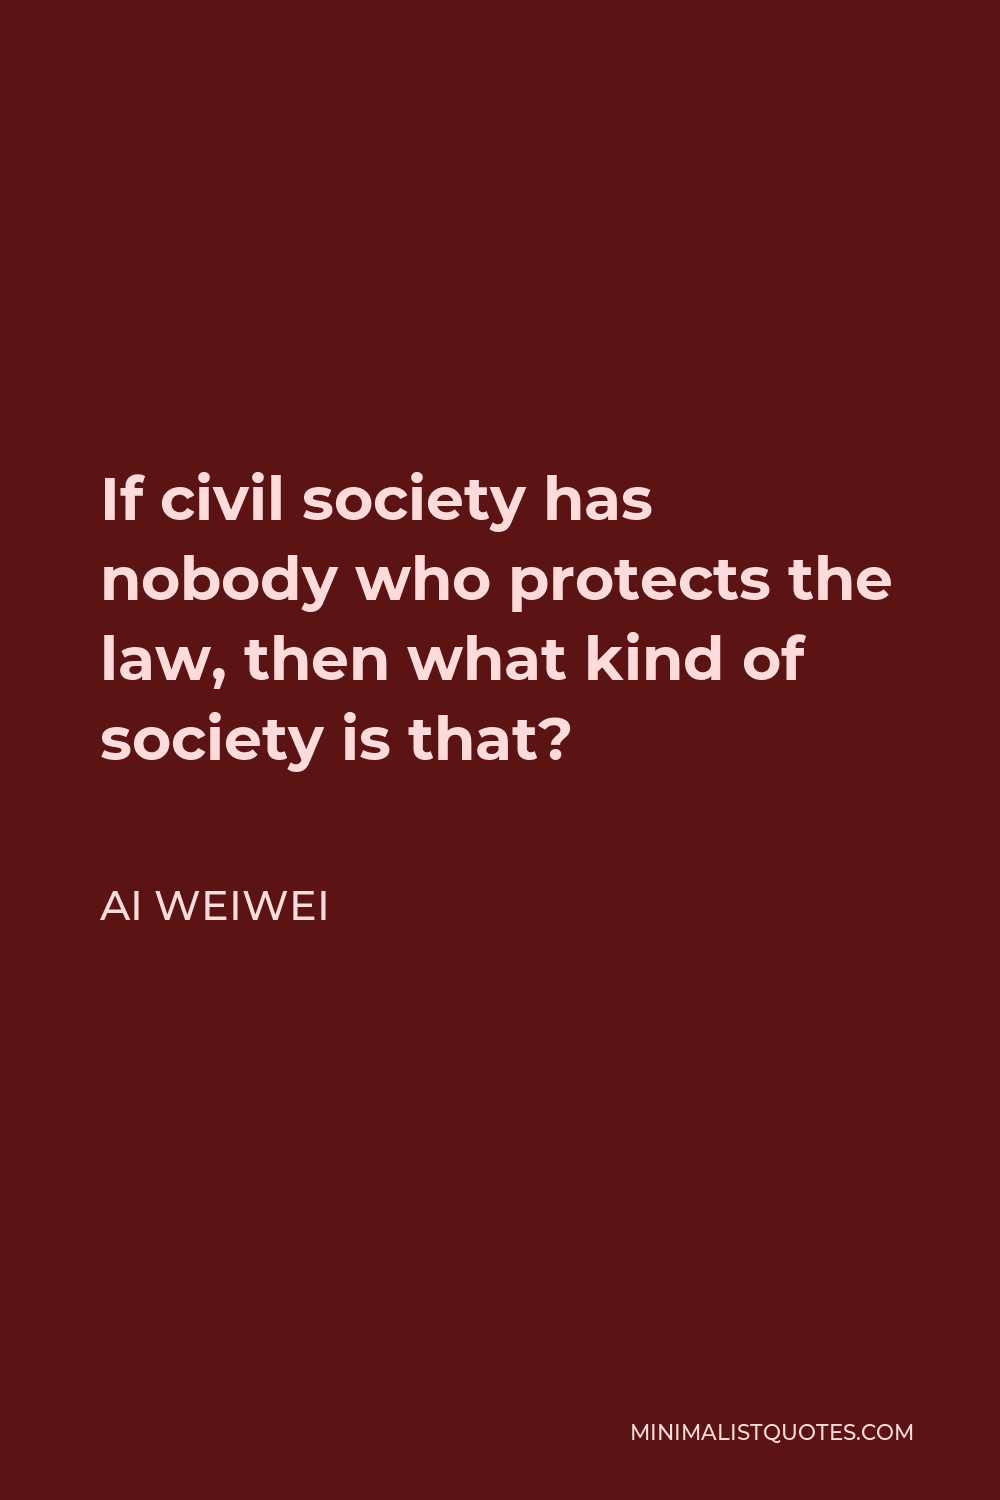 Ai Weiwei Quote - If civil society has nobody who protects the law, then what kind of society is that?